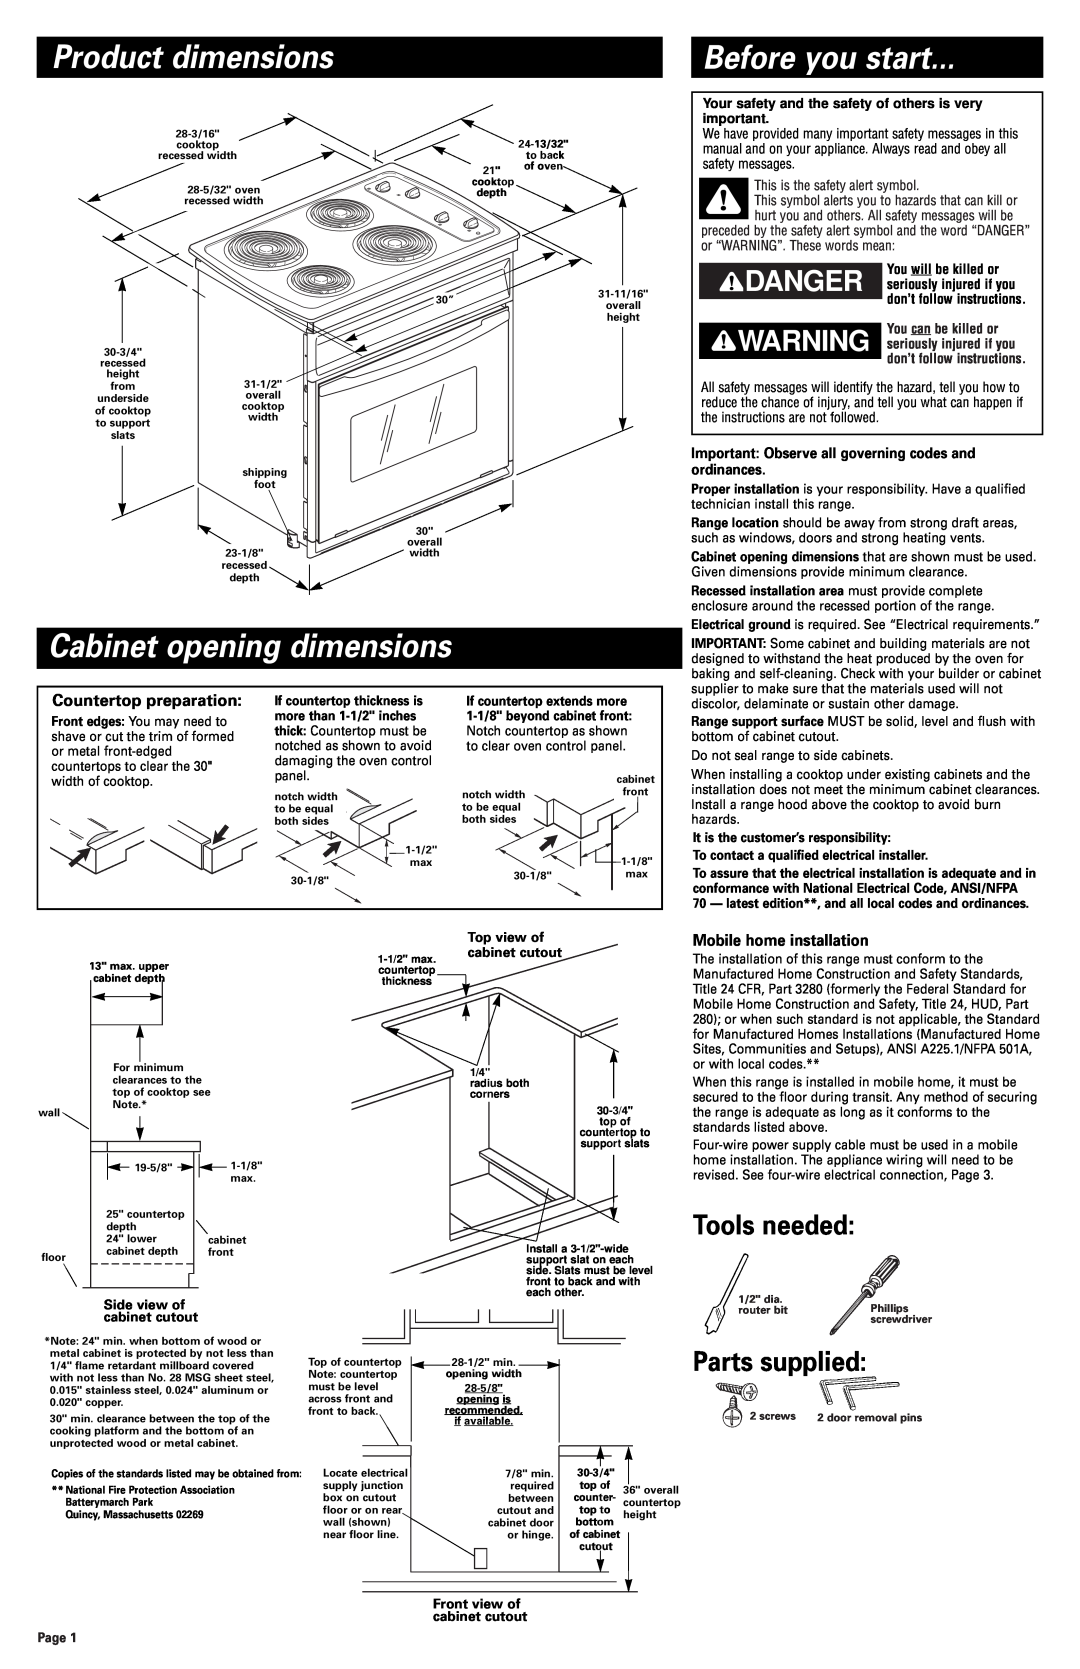 Whirlpool 3191799 Product dimensions, Before you start, Cabinet opening dimensions, Tools needed, Parts supplied 